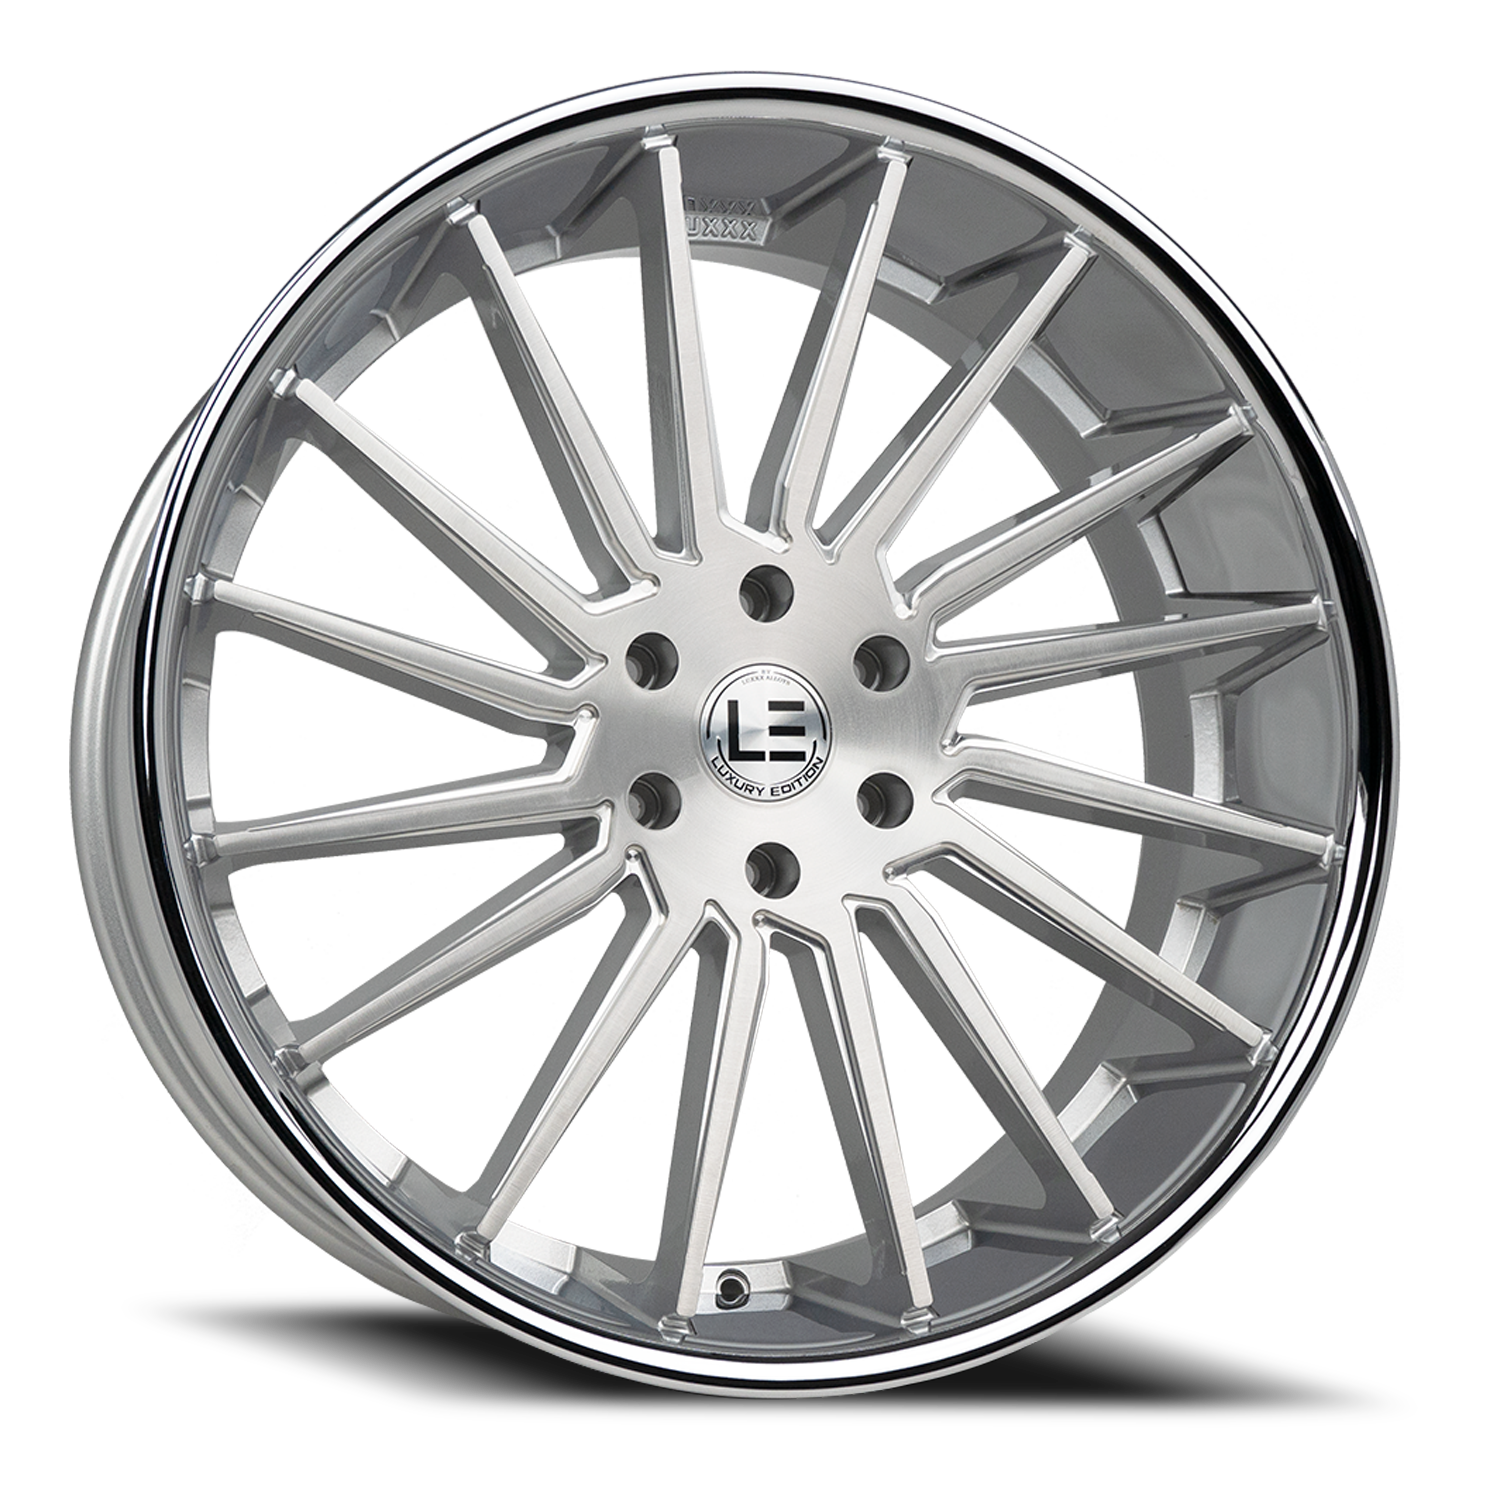 https://storage.googleapis.com/autosync-wheels/Luxxx_LE/9-SL_Brushed_Silver_Stainless-Steel-Lip-Milled_6-lug_0001.png